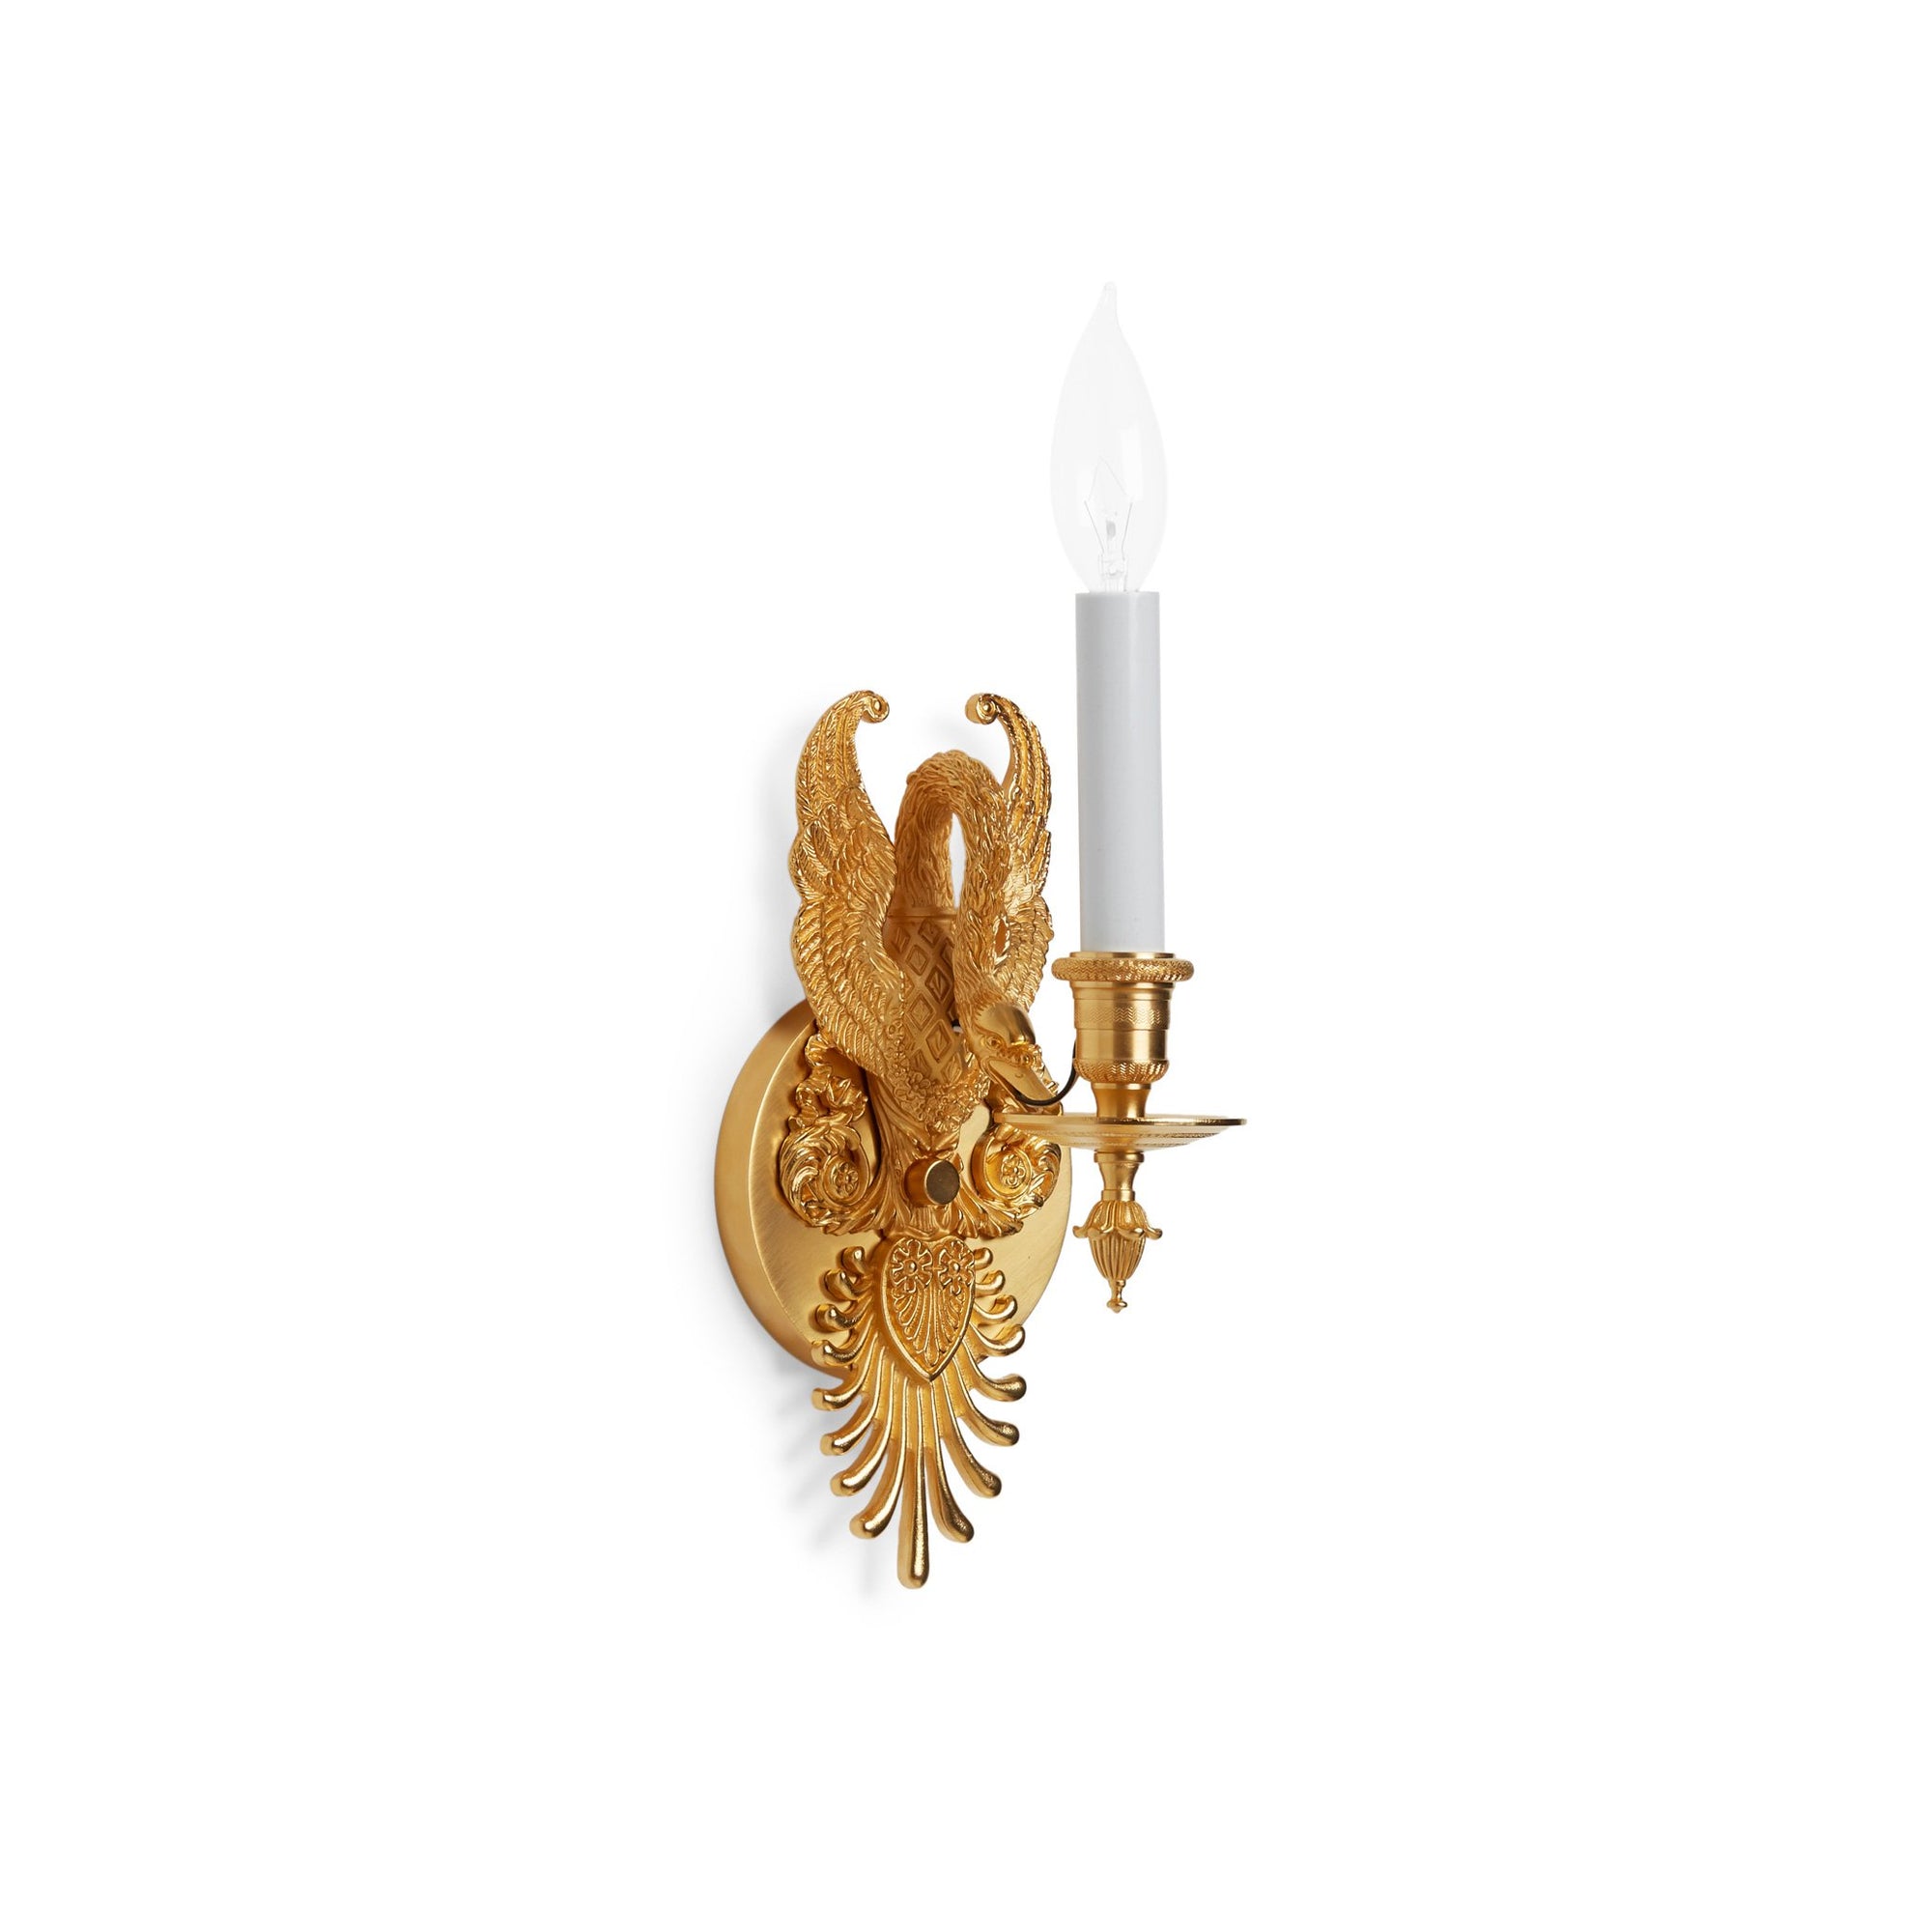 7111-GP Sherle Wagner International Imperial Swan Sconce in Gold Plate